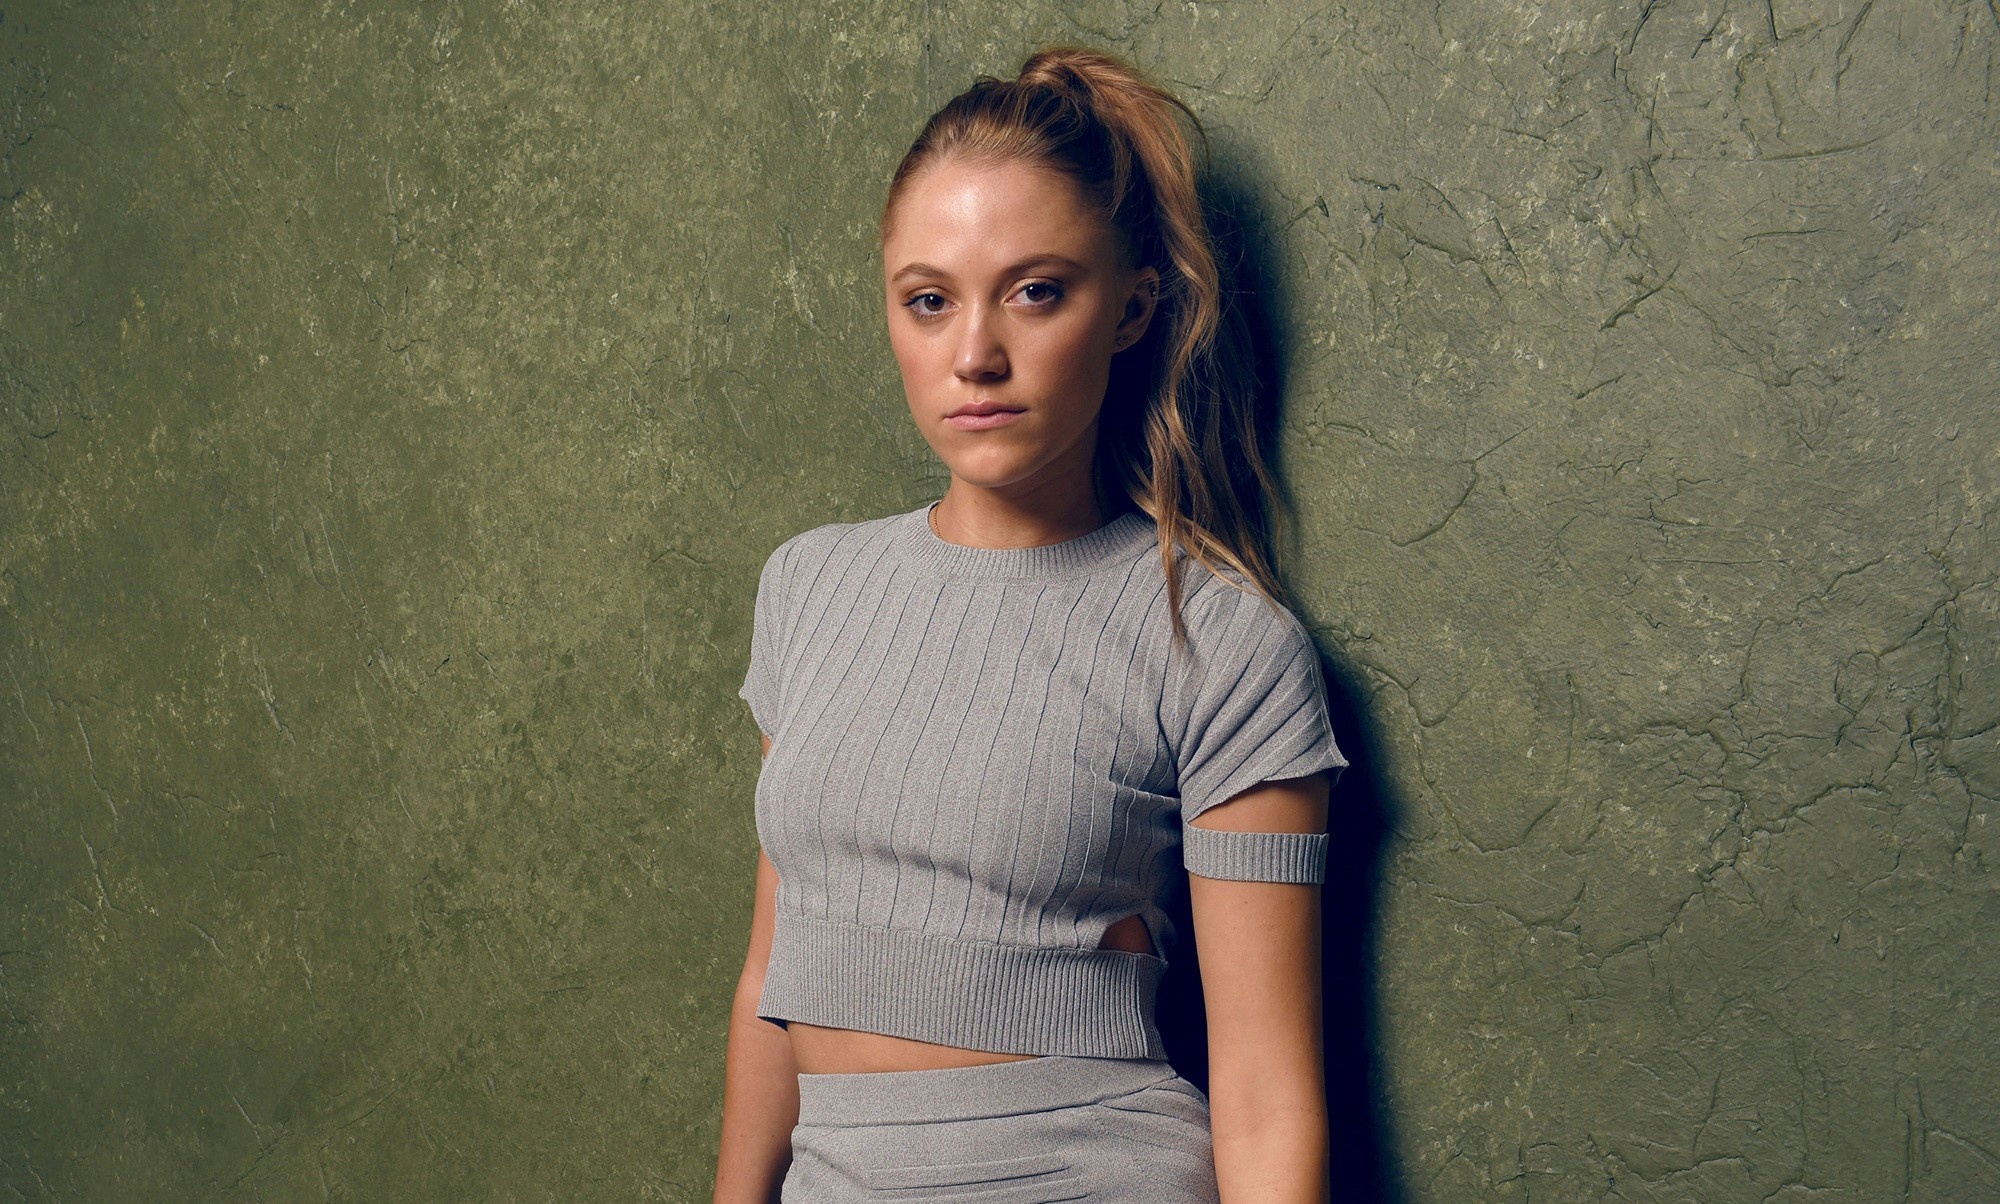 Maika Monroe: American Star's Fashion, Daughter of sign language interpreter Dixie and construction worker Jack Buckley. 2000x1210 HD Wallpaper.